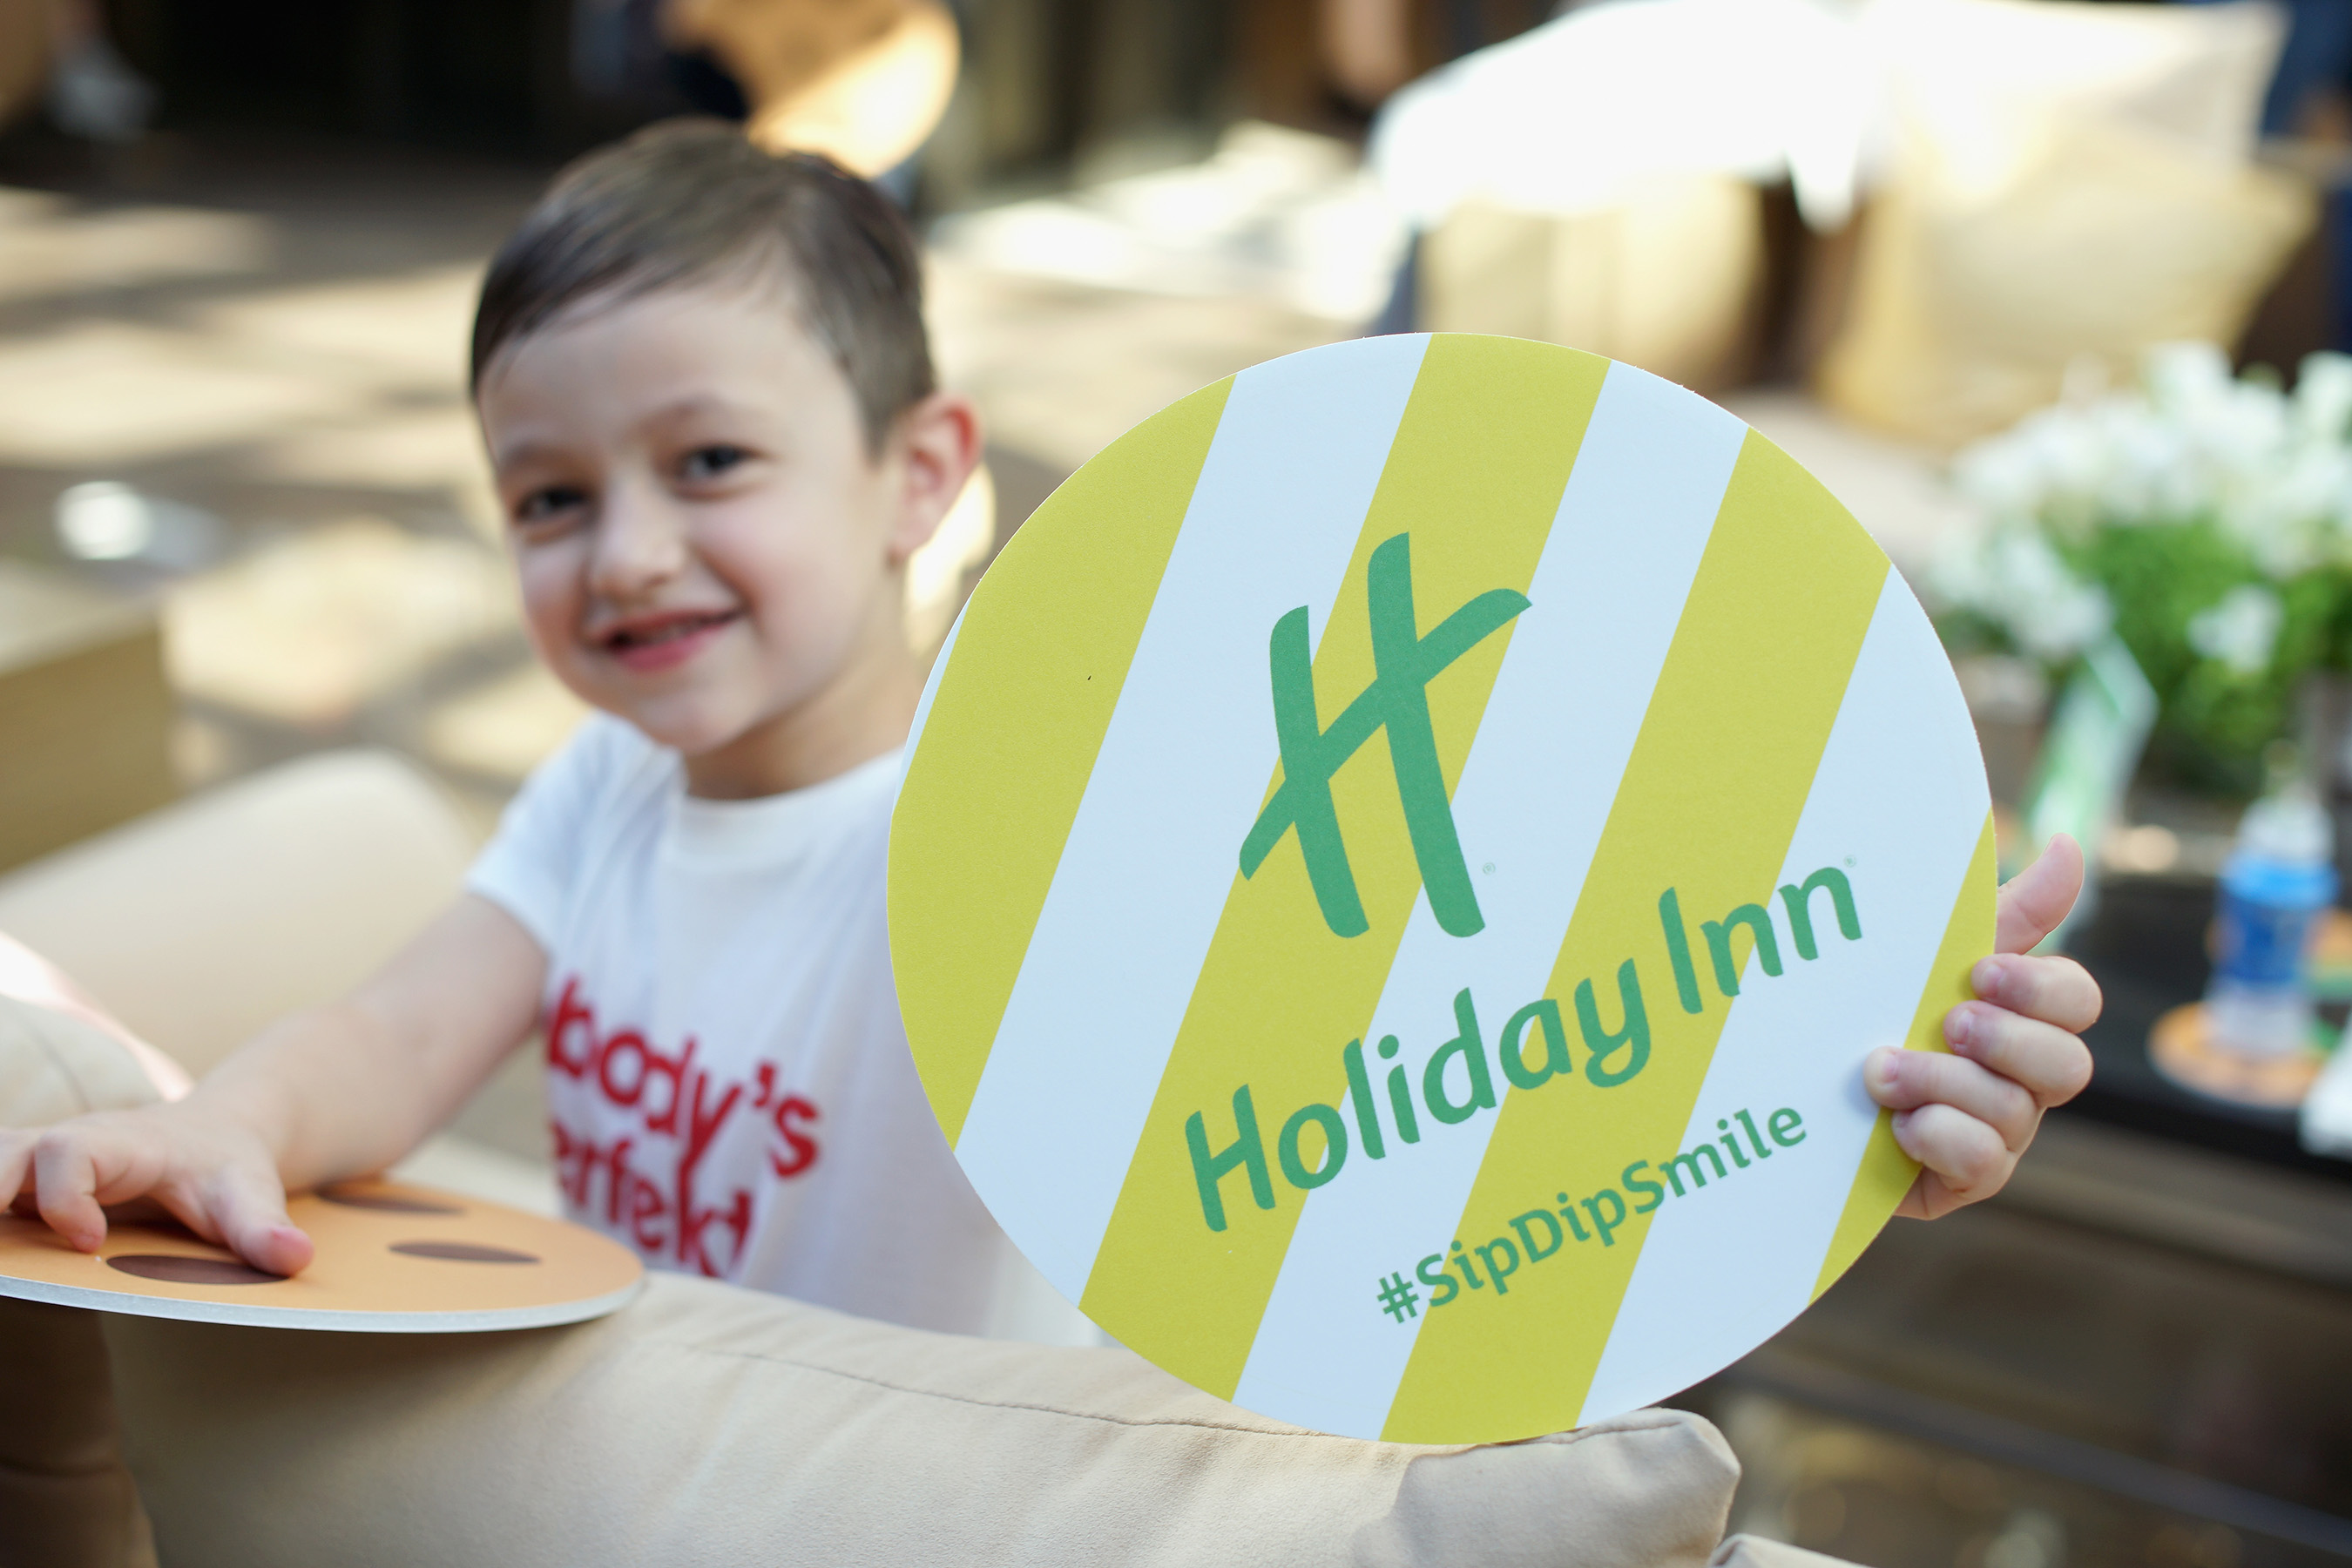 Holiday Inn invites guests to make memories this summer during Chocolate Milk Happy Hour which will take place at 20 different Holiday Inn hotel locations across the U.S.